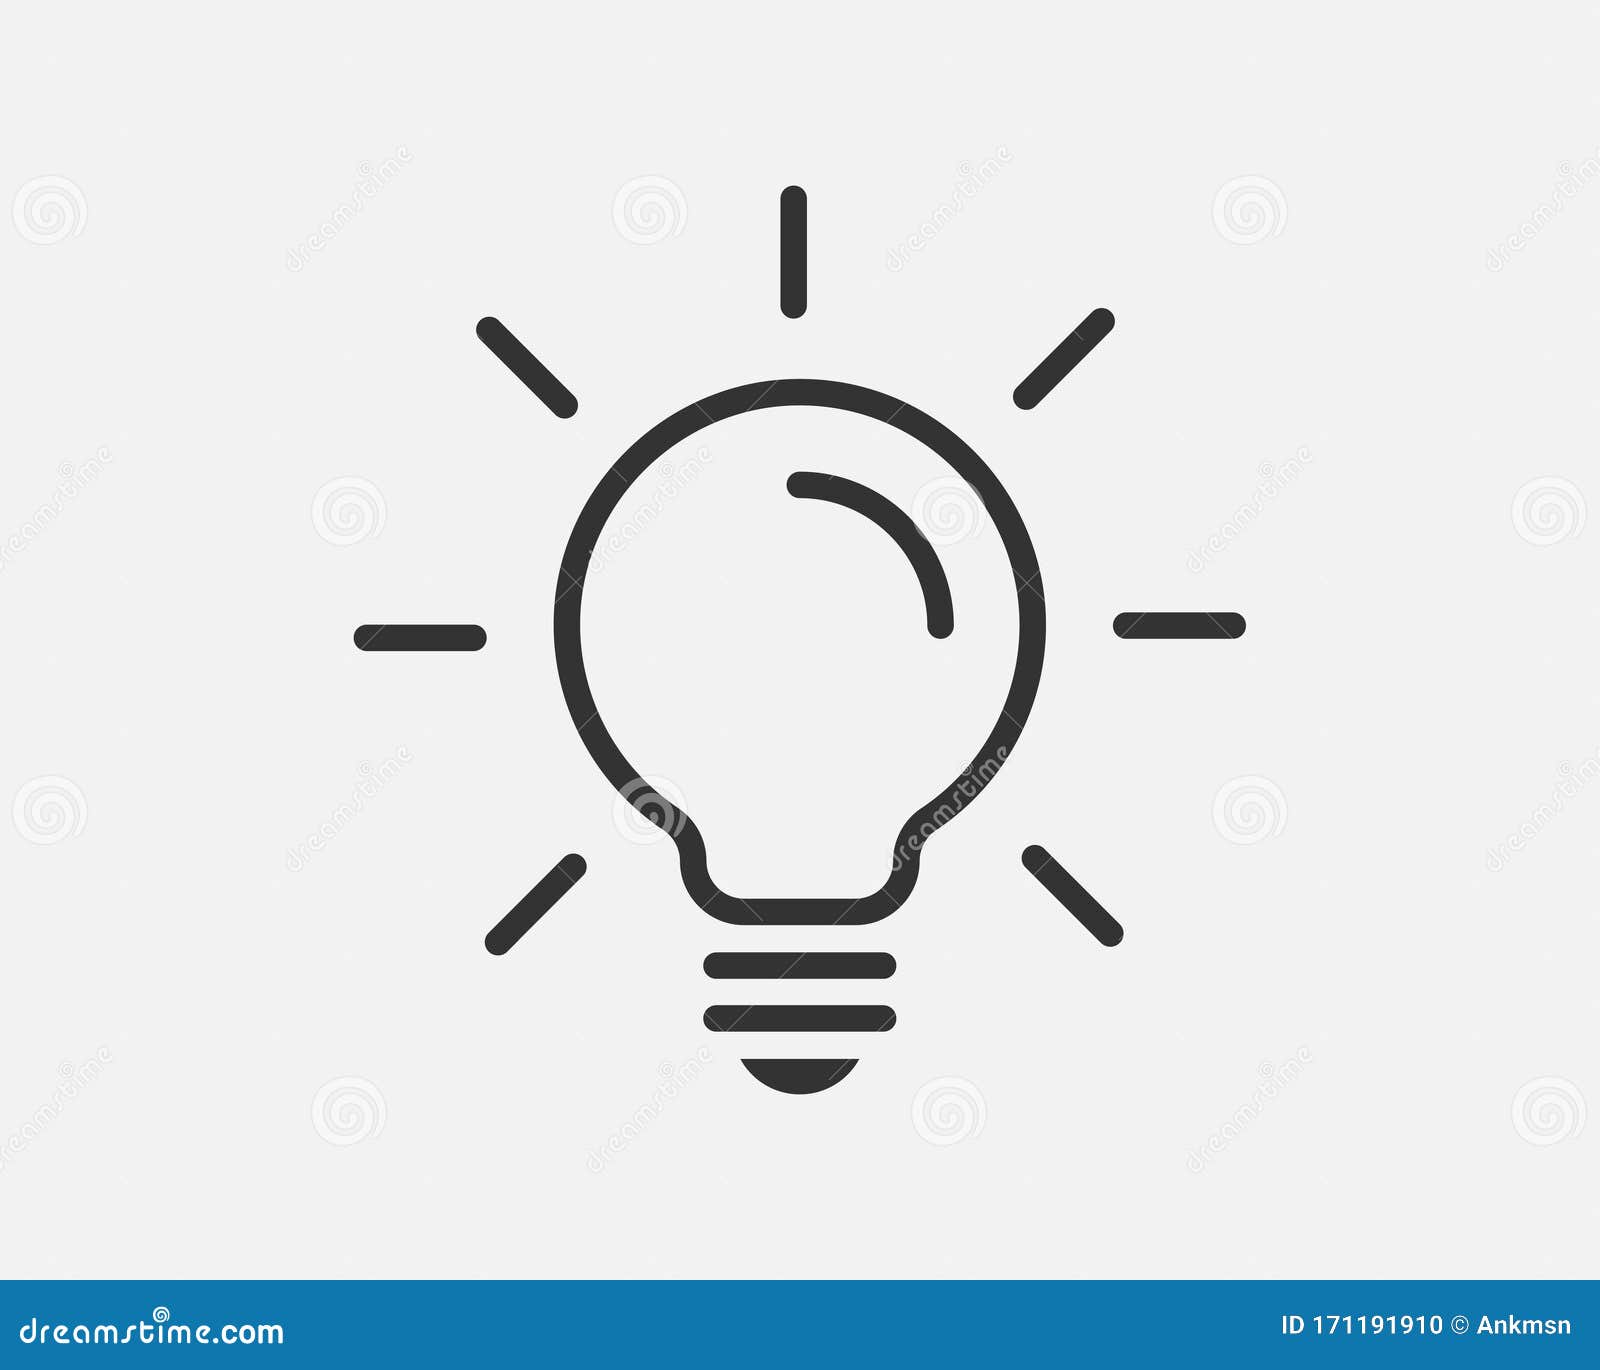 Light Bulb Icon Vector. Llightbulb Idea Logo Concept. Lamp Electricity  Icons Web Design Element Stock Vector - Illustration of doodle, isolated:  171191910